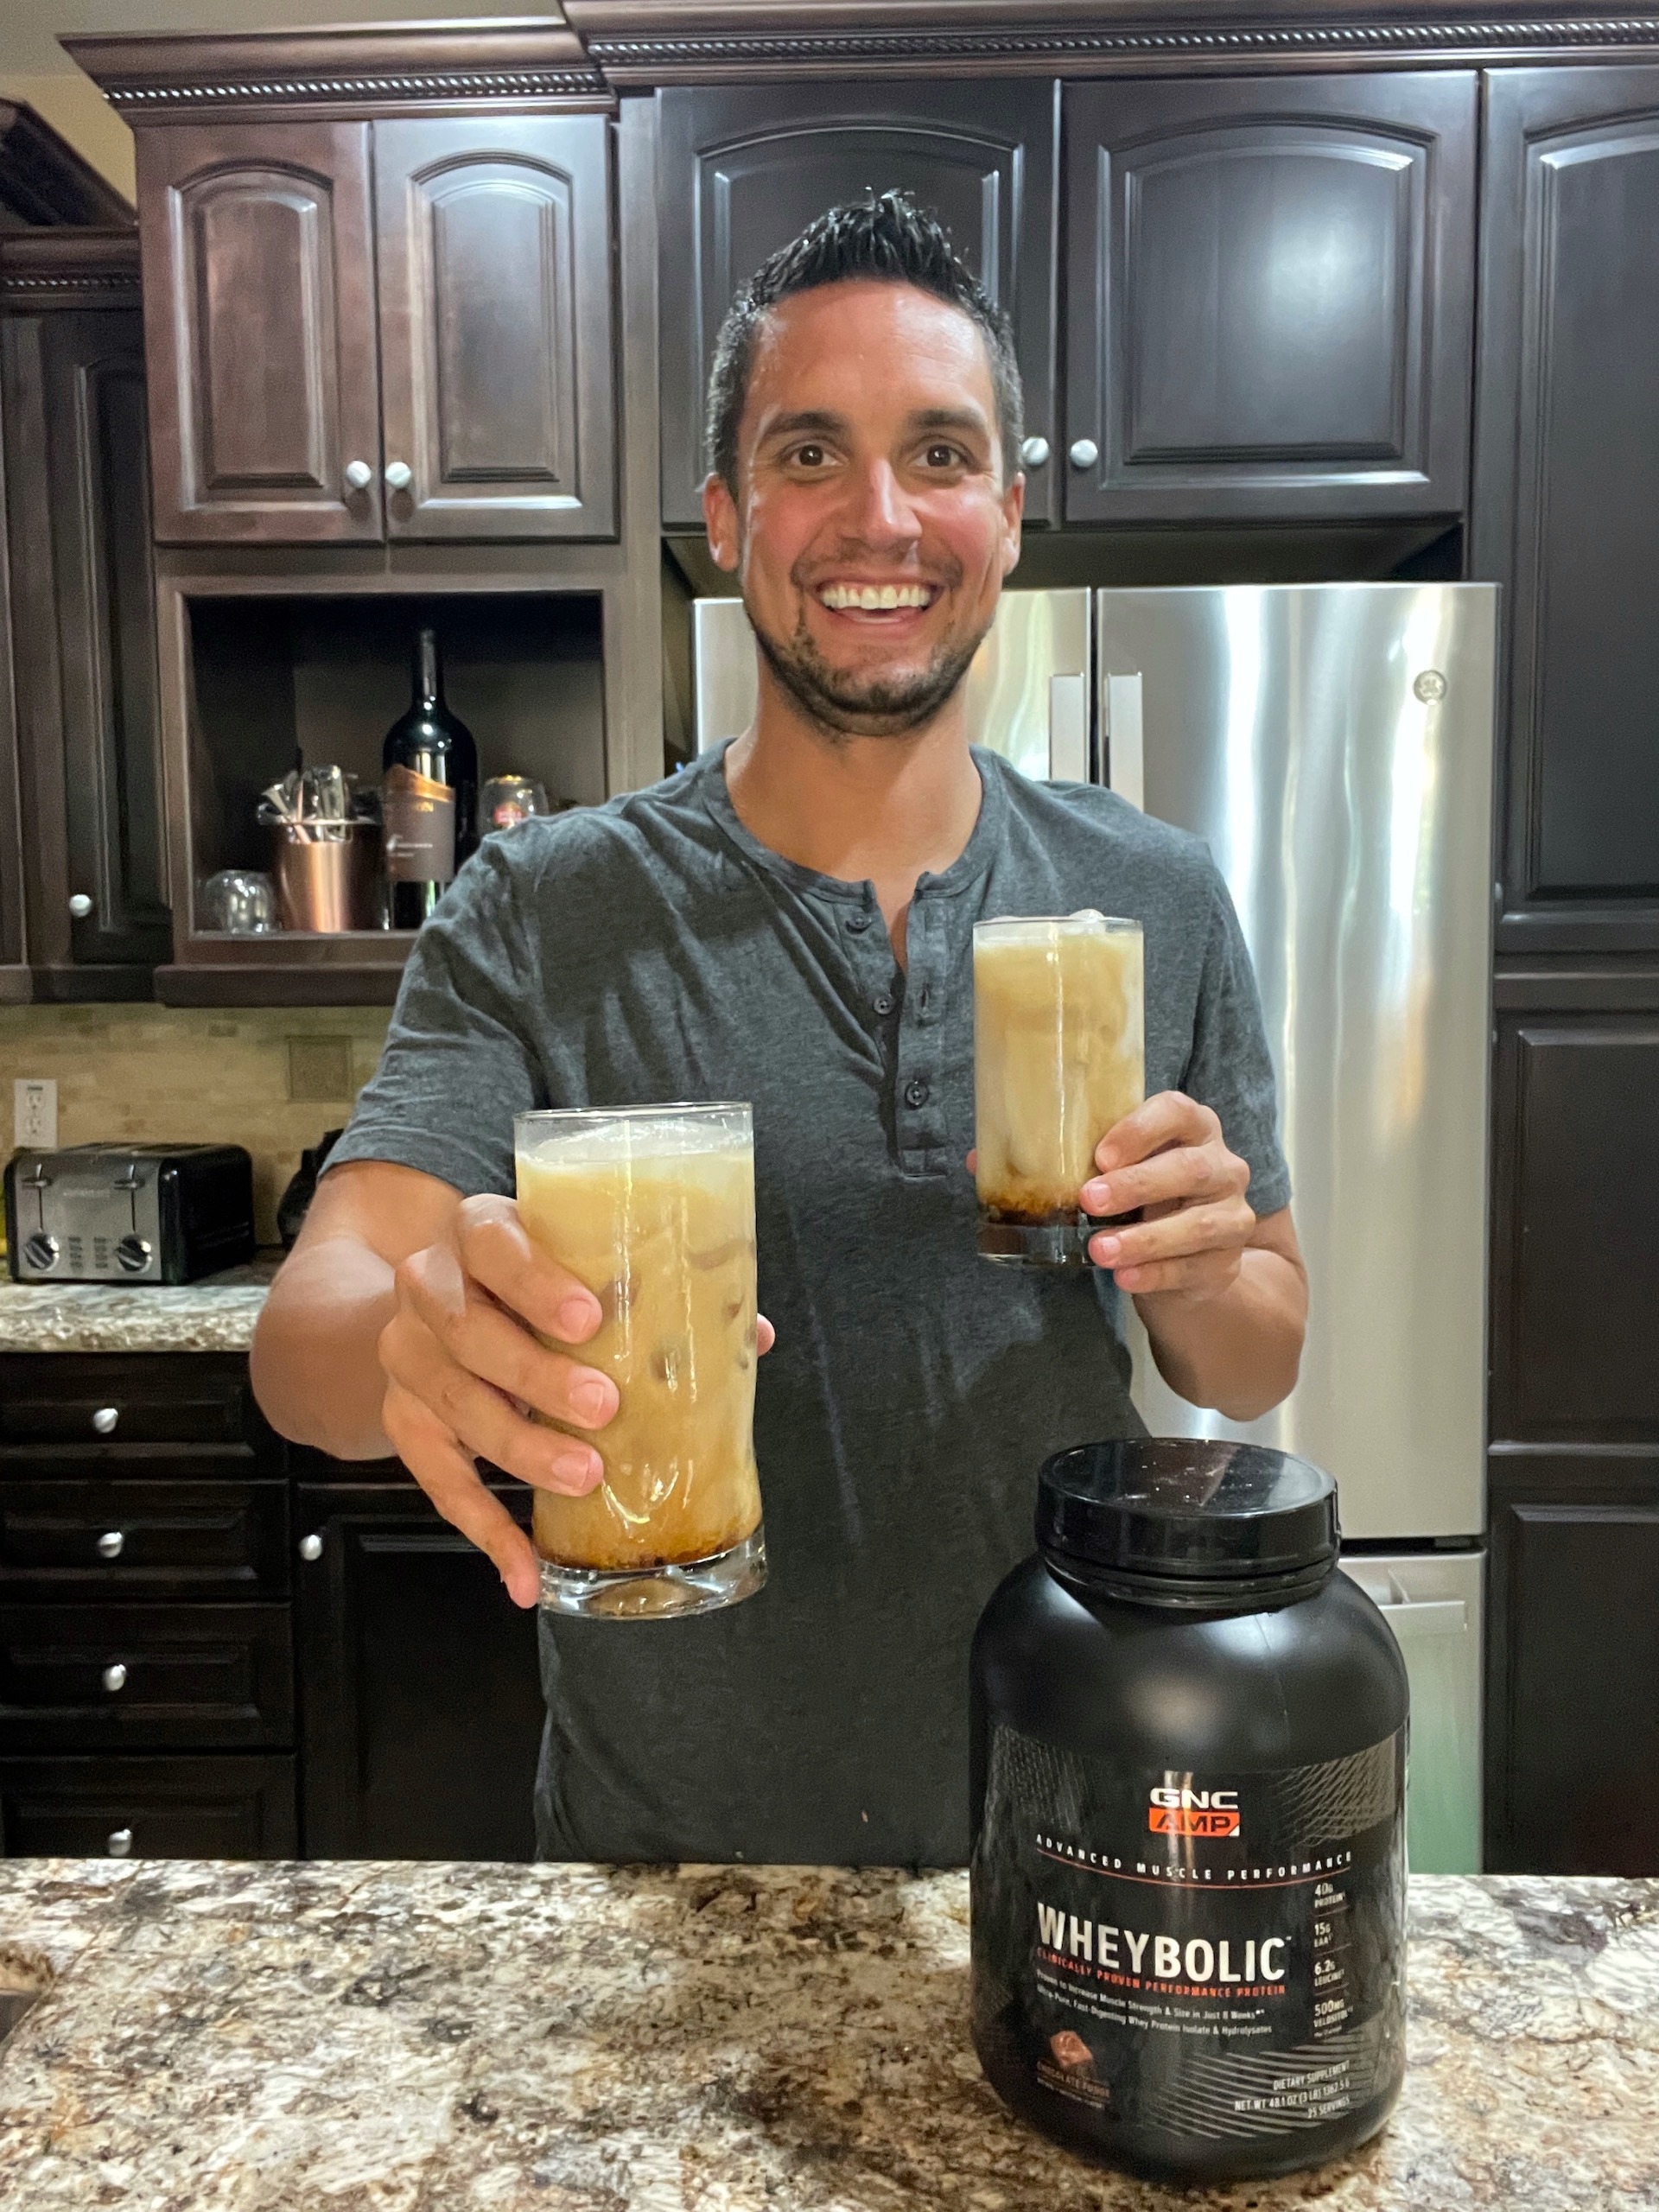 Protein Coffee Made in 1 Minute